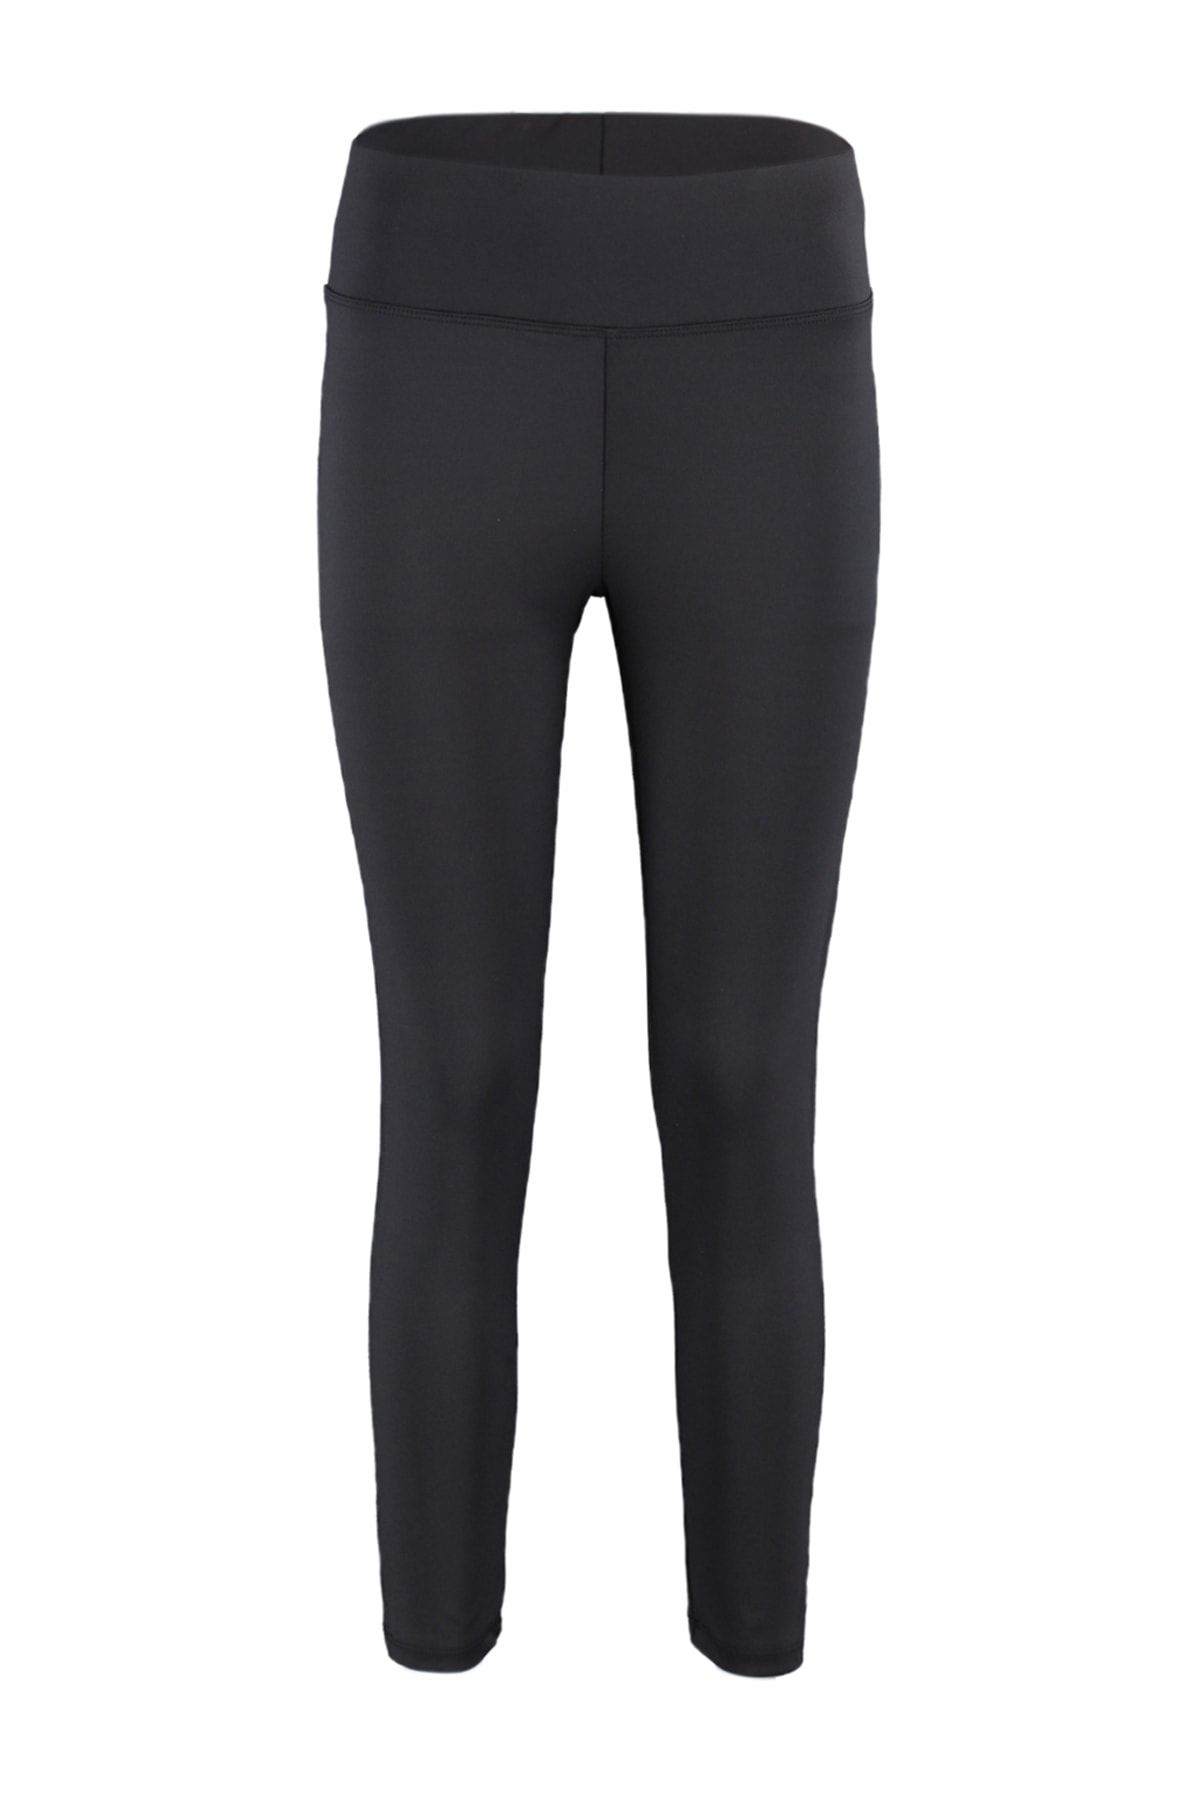 Curvation Women's Plus Size Figure Enhancing Blossom Tights Black Size Iui2  for sale online